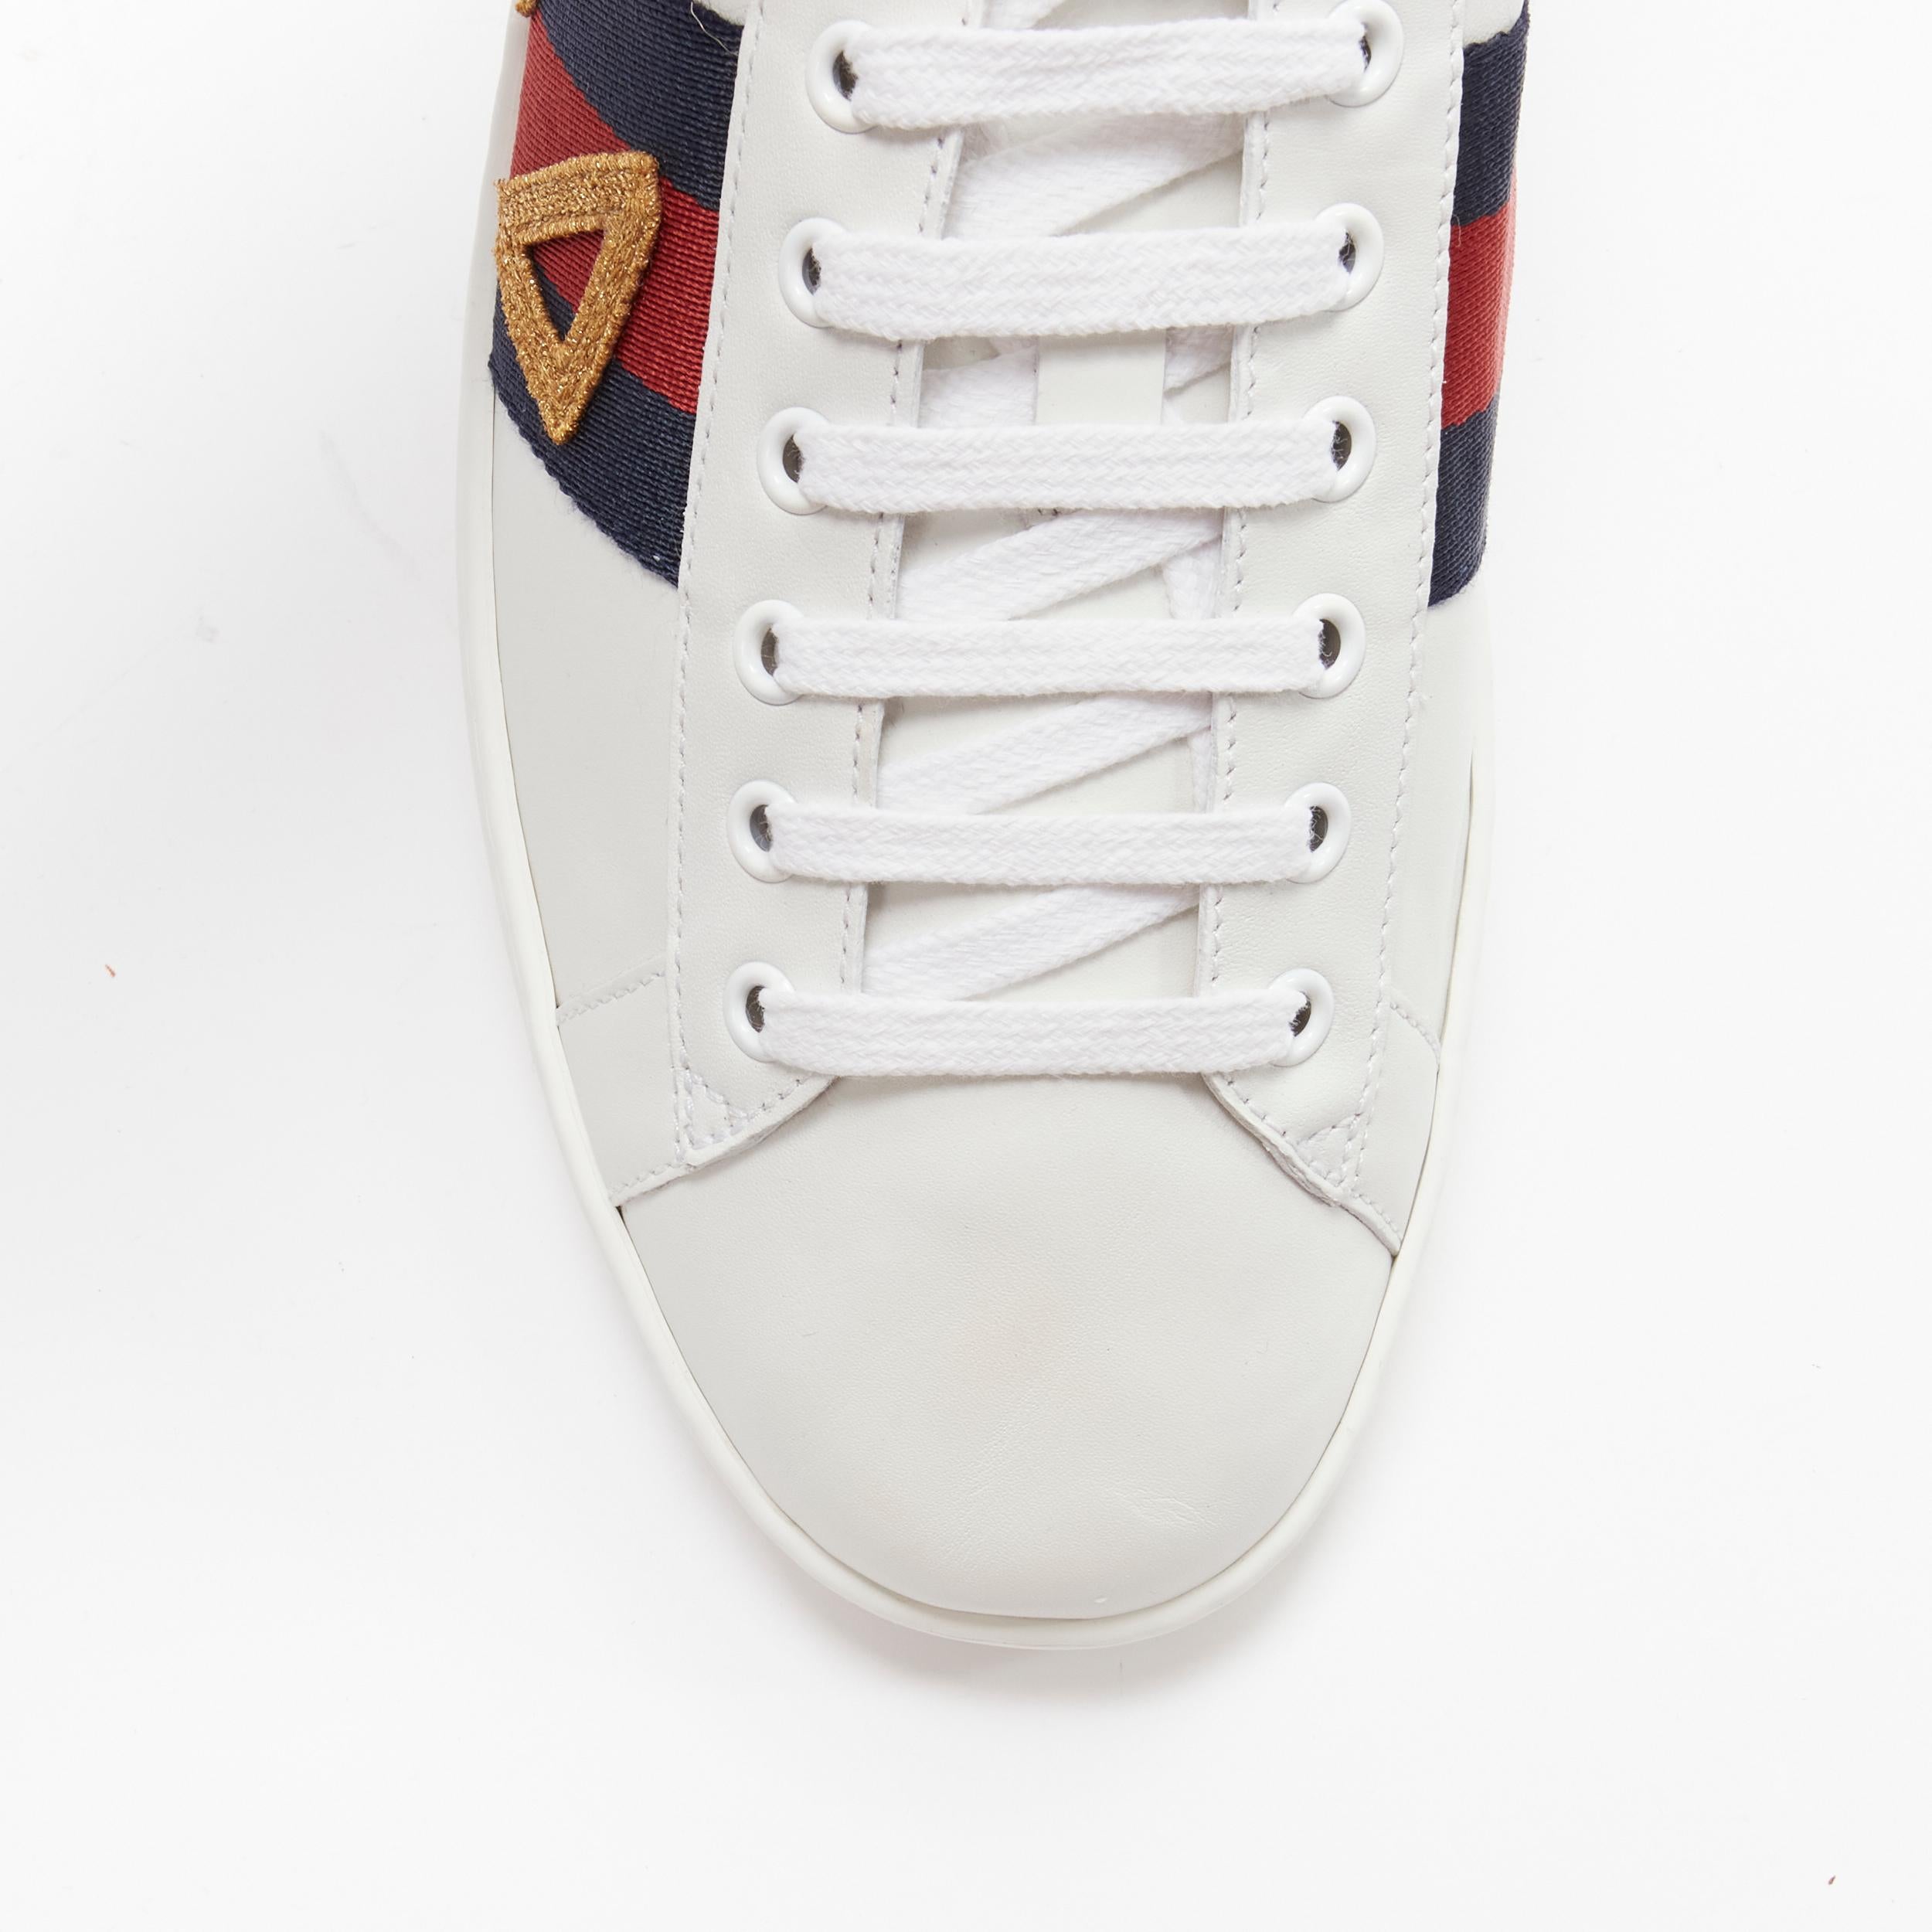 GUCCI Ace Loved gold letter patchwork white navy red web sneaker UK9 EU43 For Sale 1